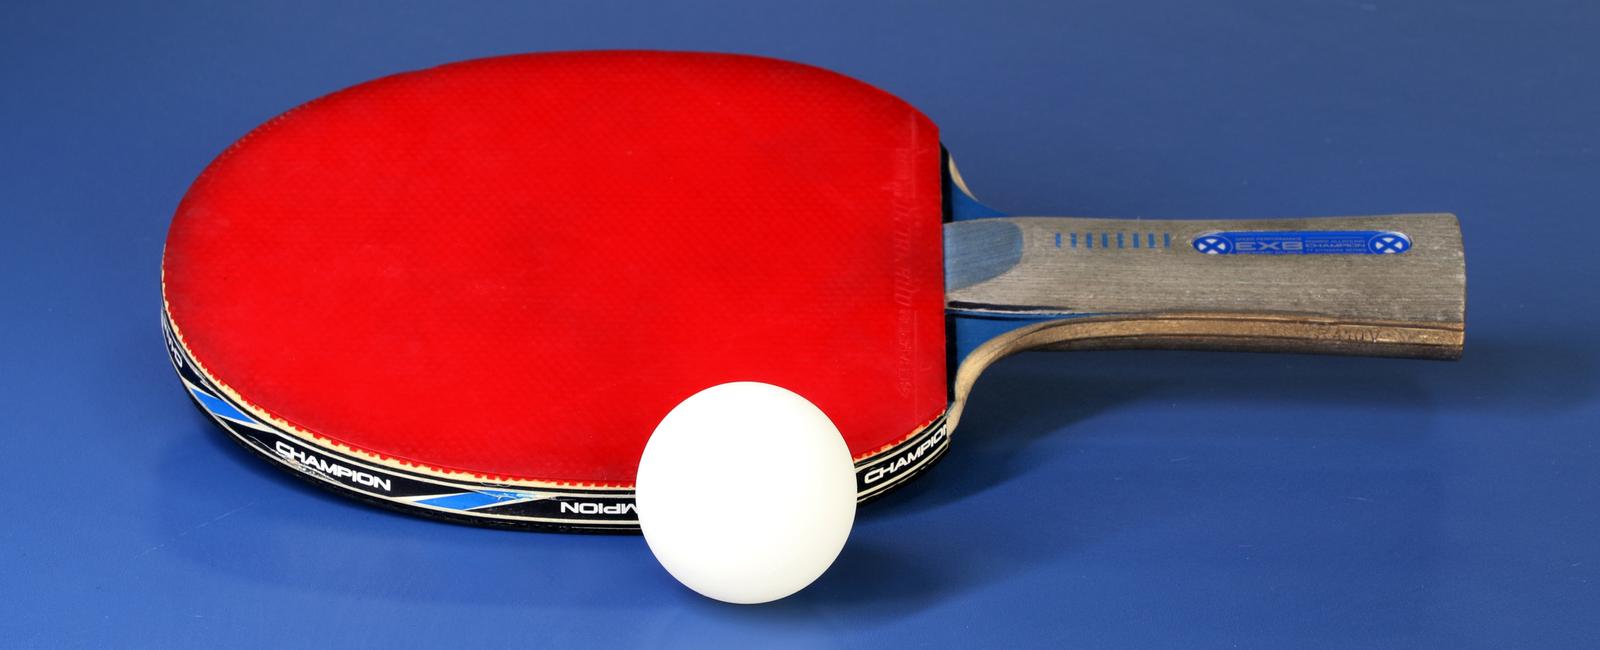 Table tennis balls can travel off the paddle at 105 6 miles per hour